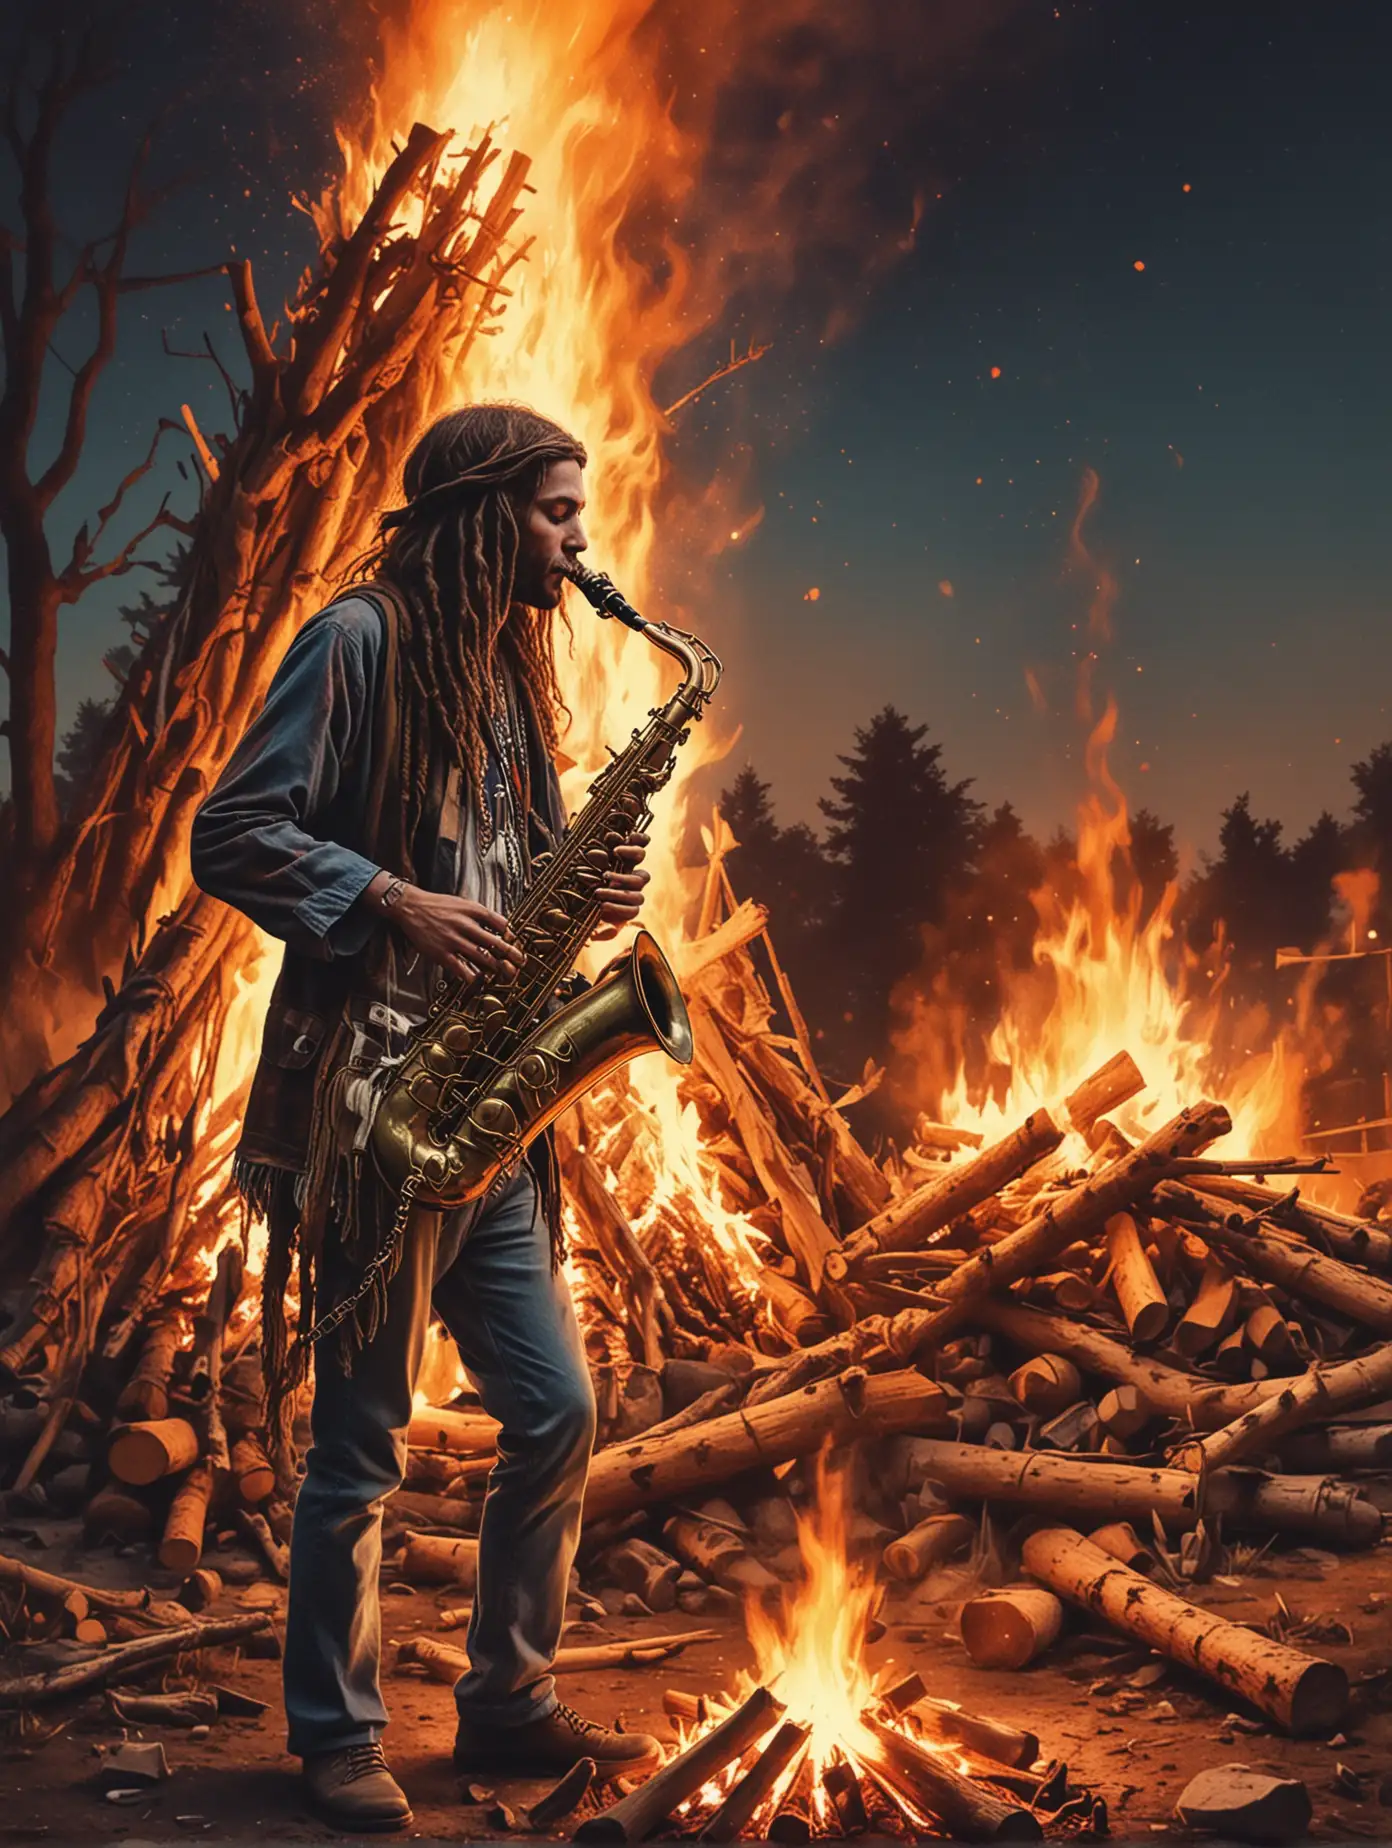 Hippy playing saxophone next to a large bonfire - done in an illustrated concert poster style